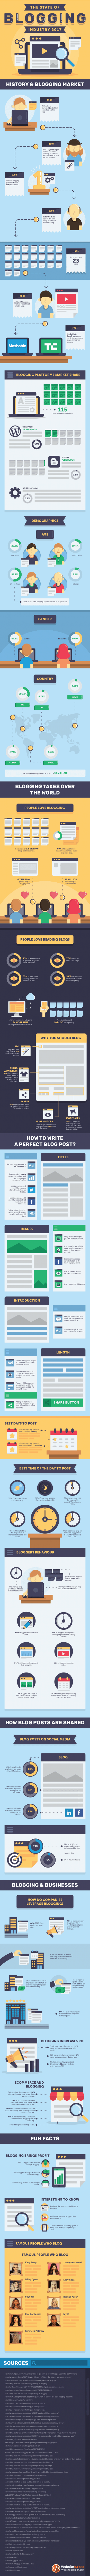 Infographic about the current state of blogging industry and what are the current trends.